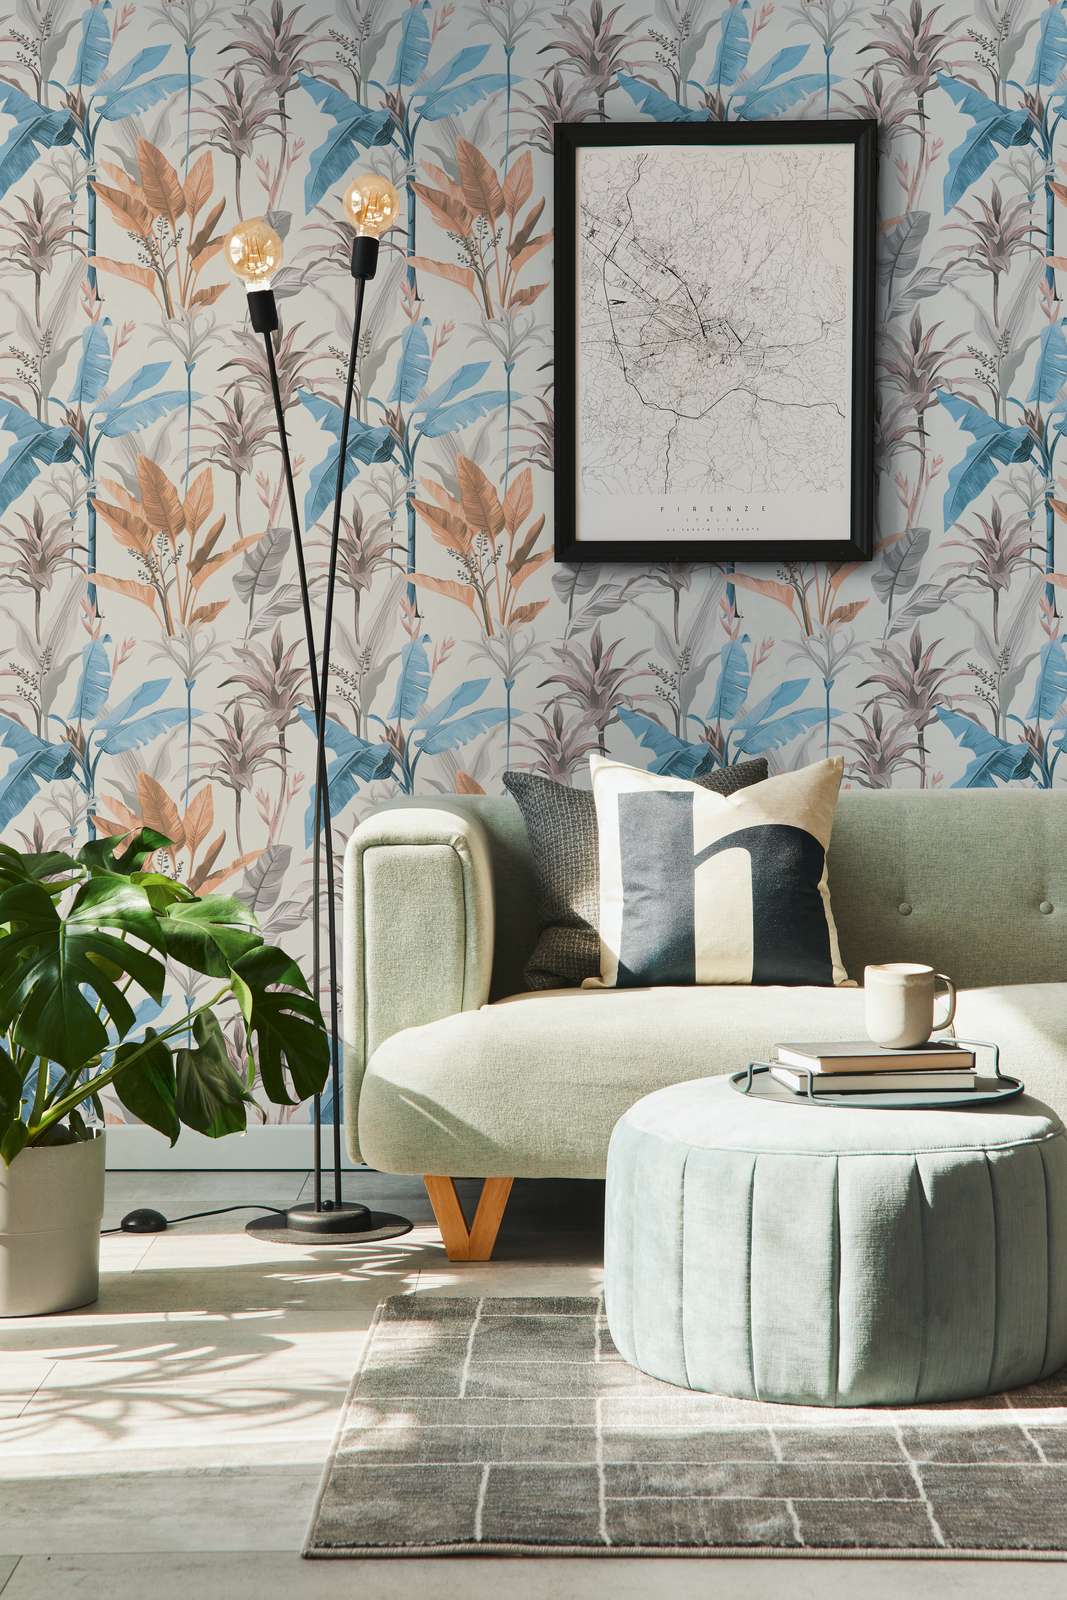             Detailed floral non-woven wallpaper with leaves pattern - blue, grey, cream
        